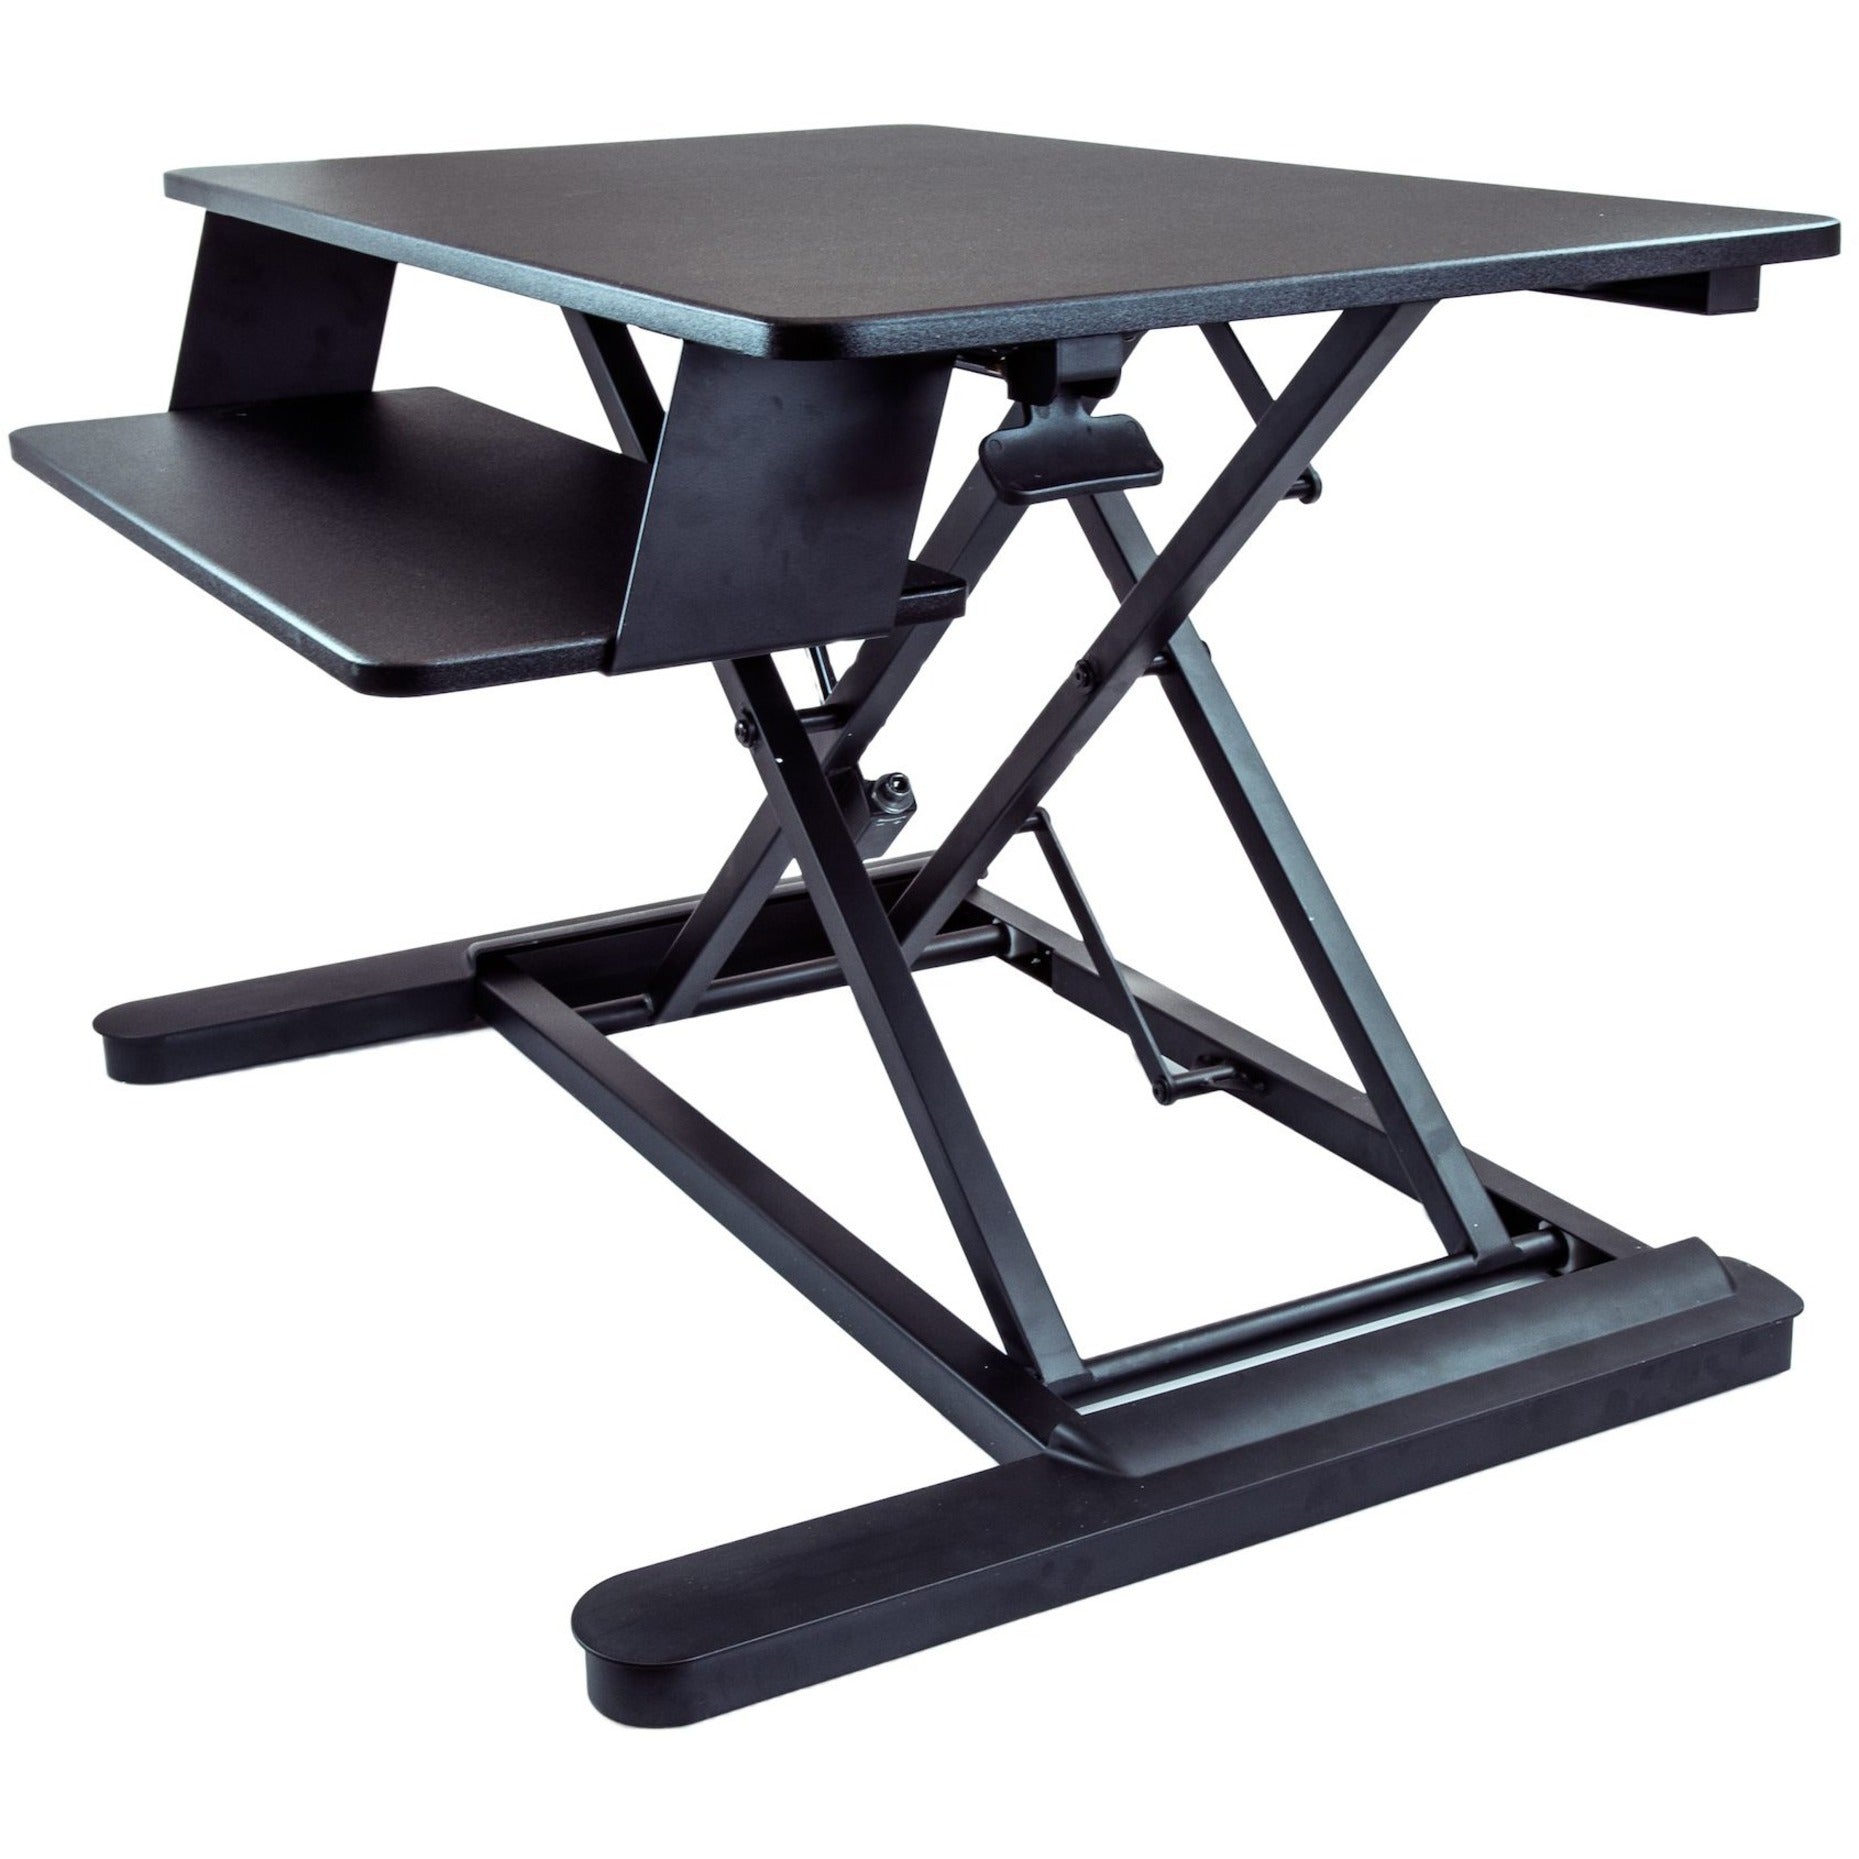 StarTech.com ARMSTSLG Sit-Stand Desk Converter - Large 35in Work Surface, Adjustable Stand up Desk, One-Touch Height Adjustment